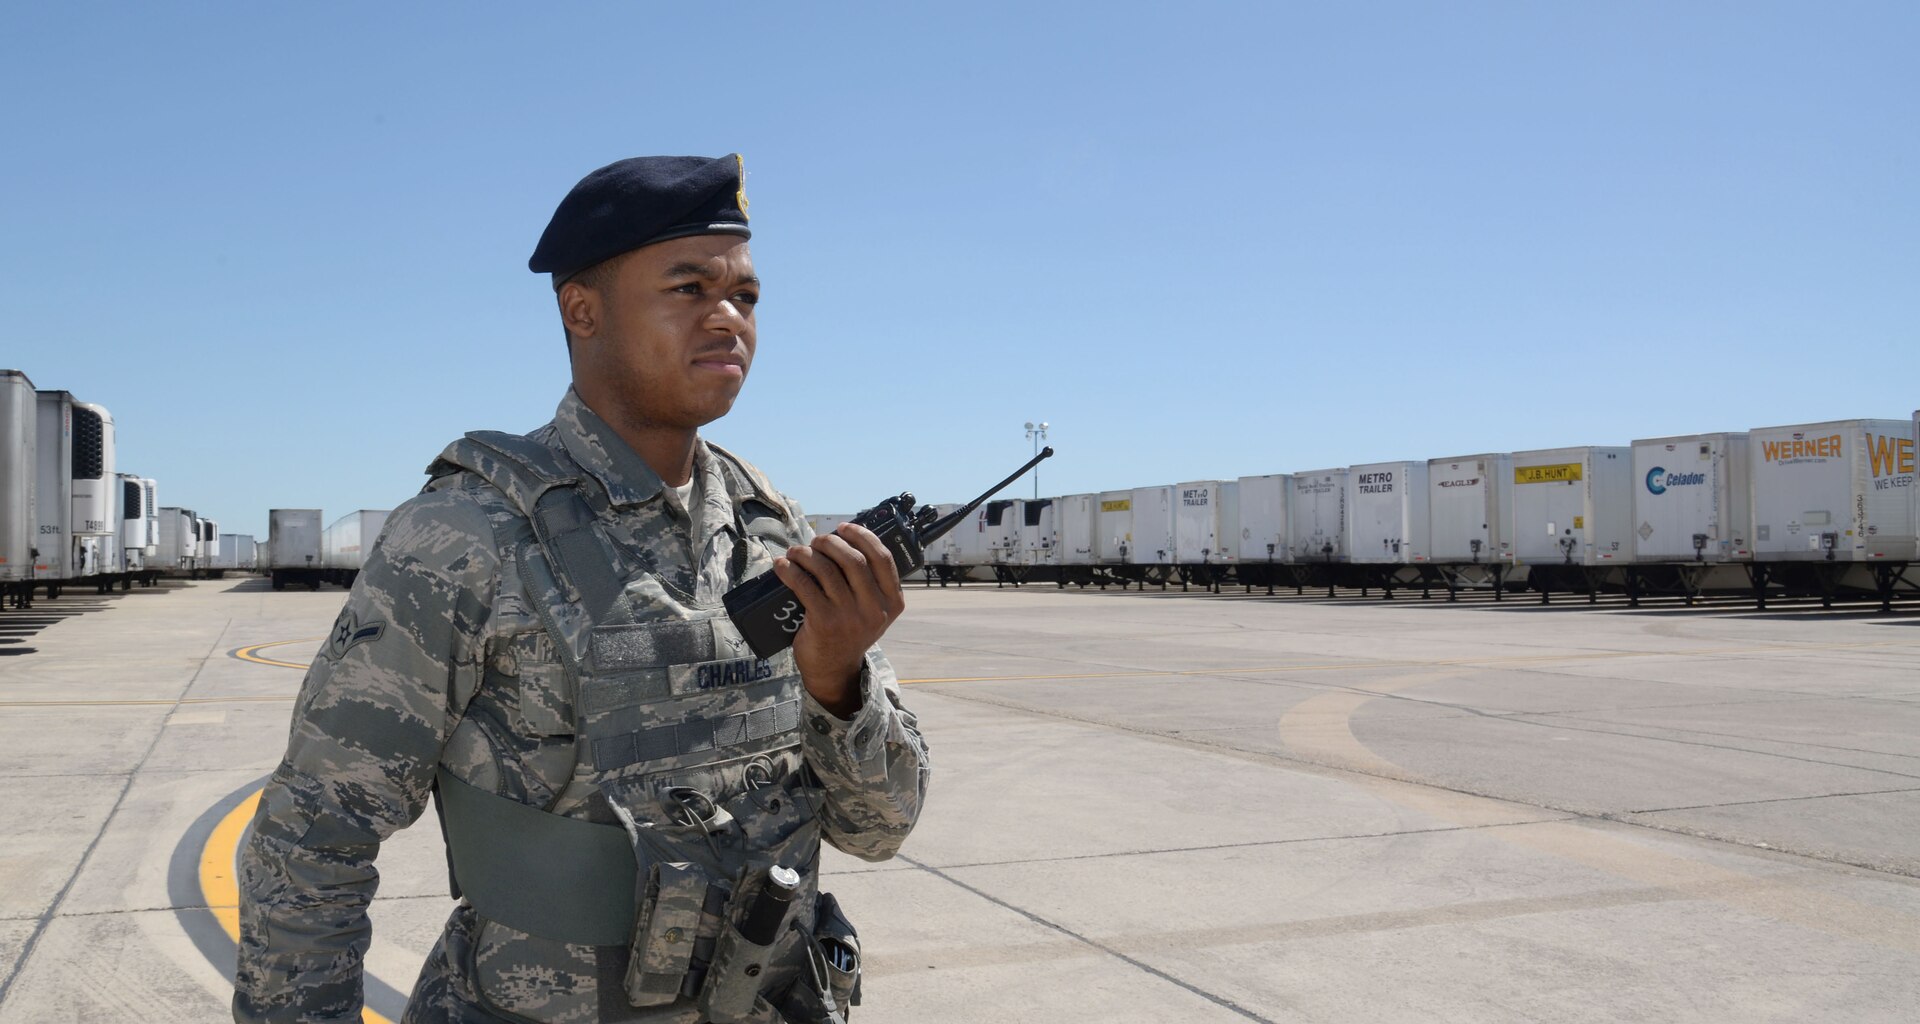 Amn Malcolm Charles, 902nd Security Forces Squadron entry controller, sends a situation report of the Incident Support Base where Federal Emergency Management Agency disaster relief trucks are parked at Joint Base San Antonio-Randolph, Texas, September 7, 2017.